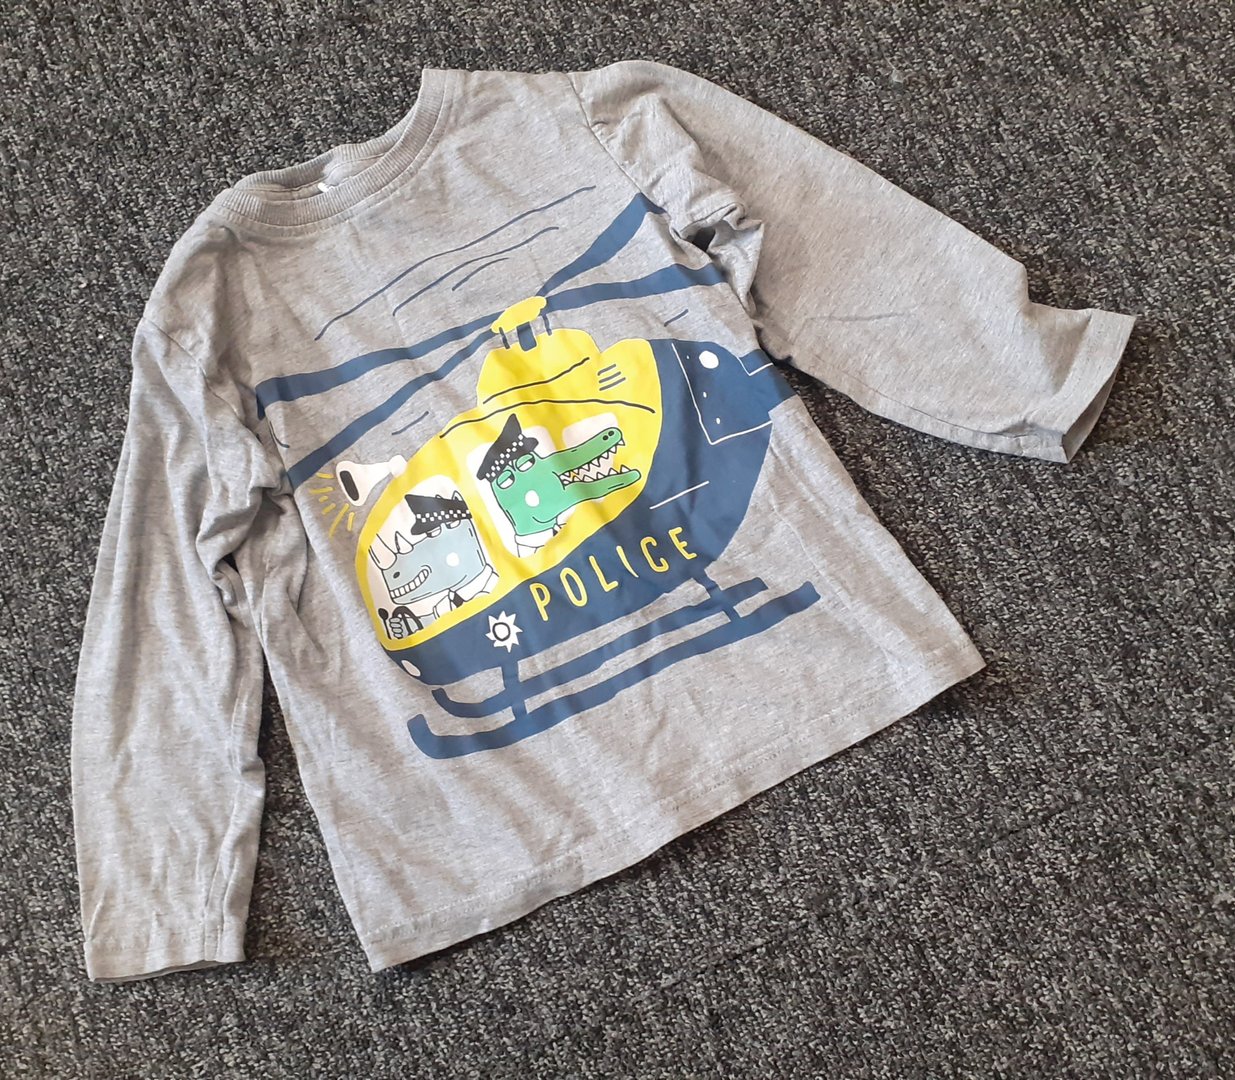 PRELOVED M&S Grey Long Sleeve T-Shirt w/ Police Design 3-4Yrs (98-104cm) RRP £8 CLEARANCE XL £2.49